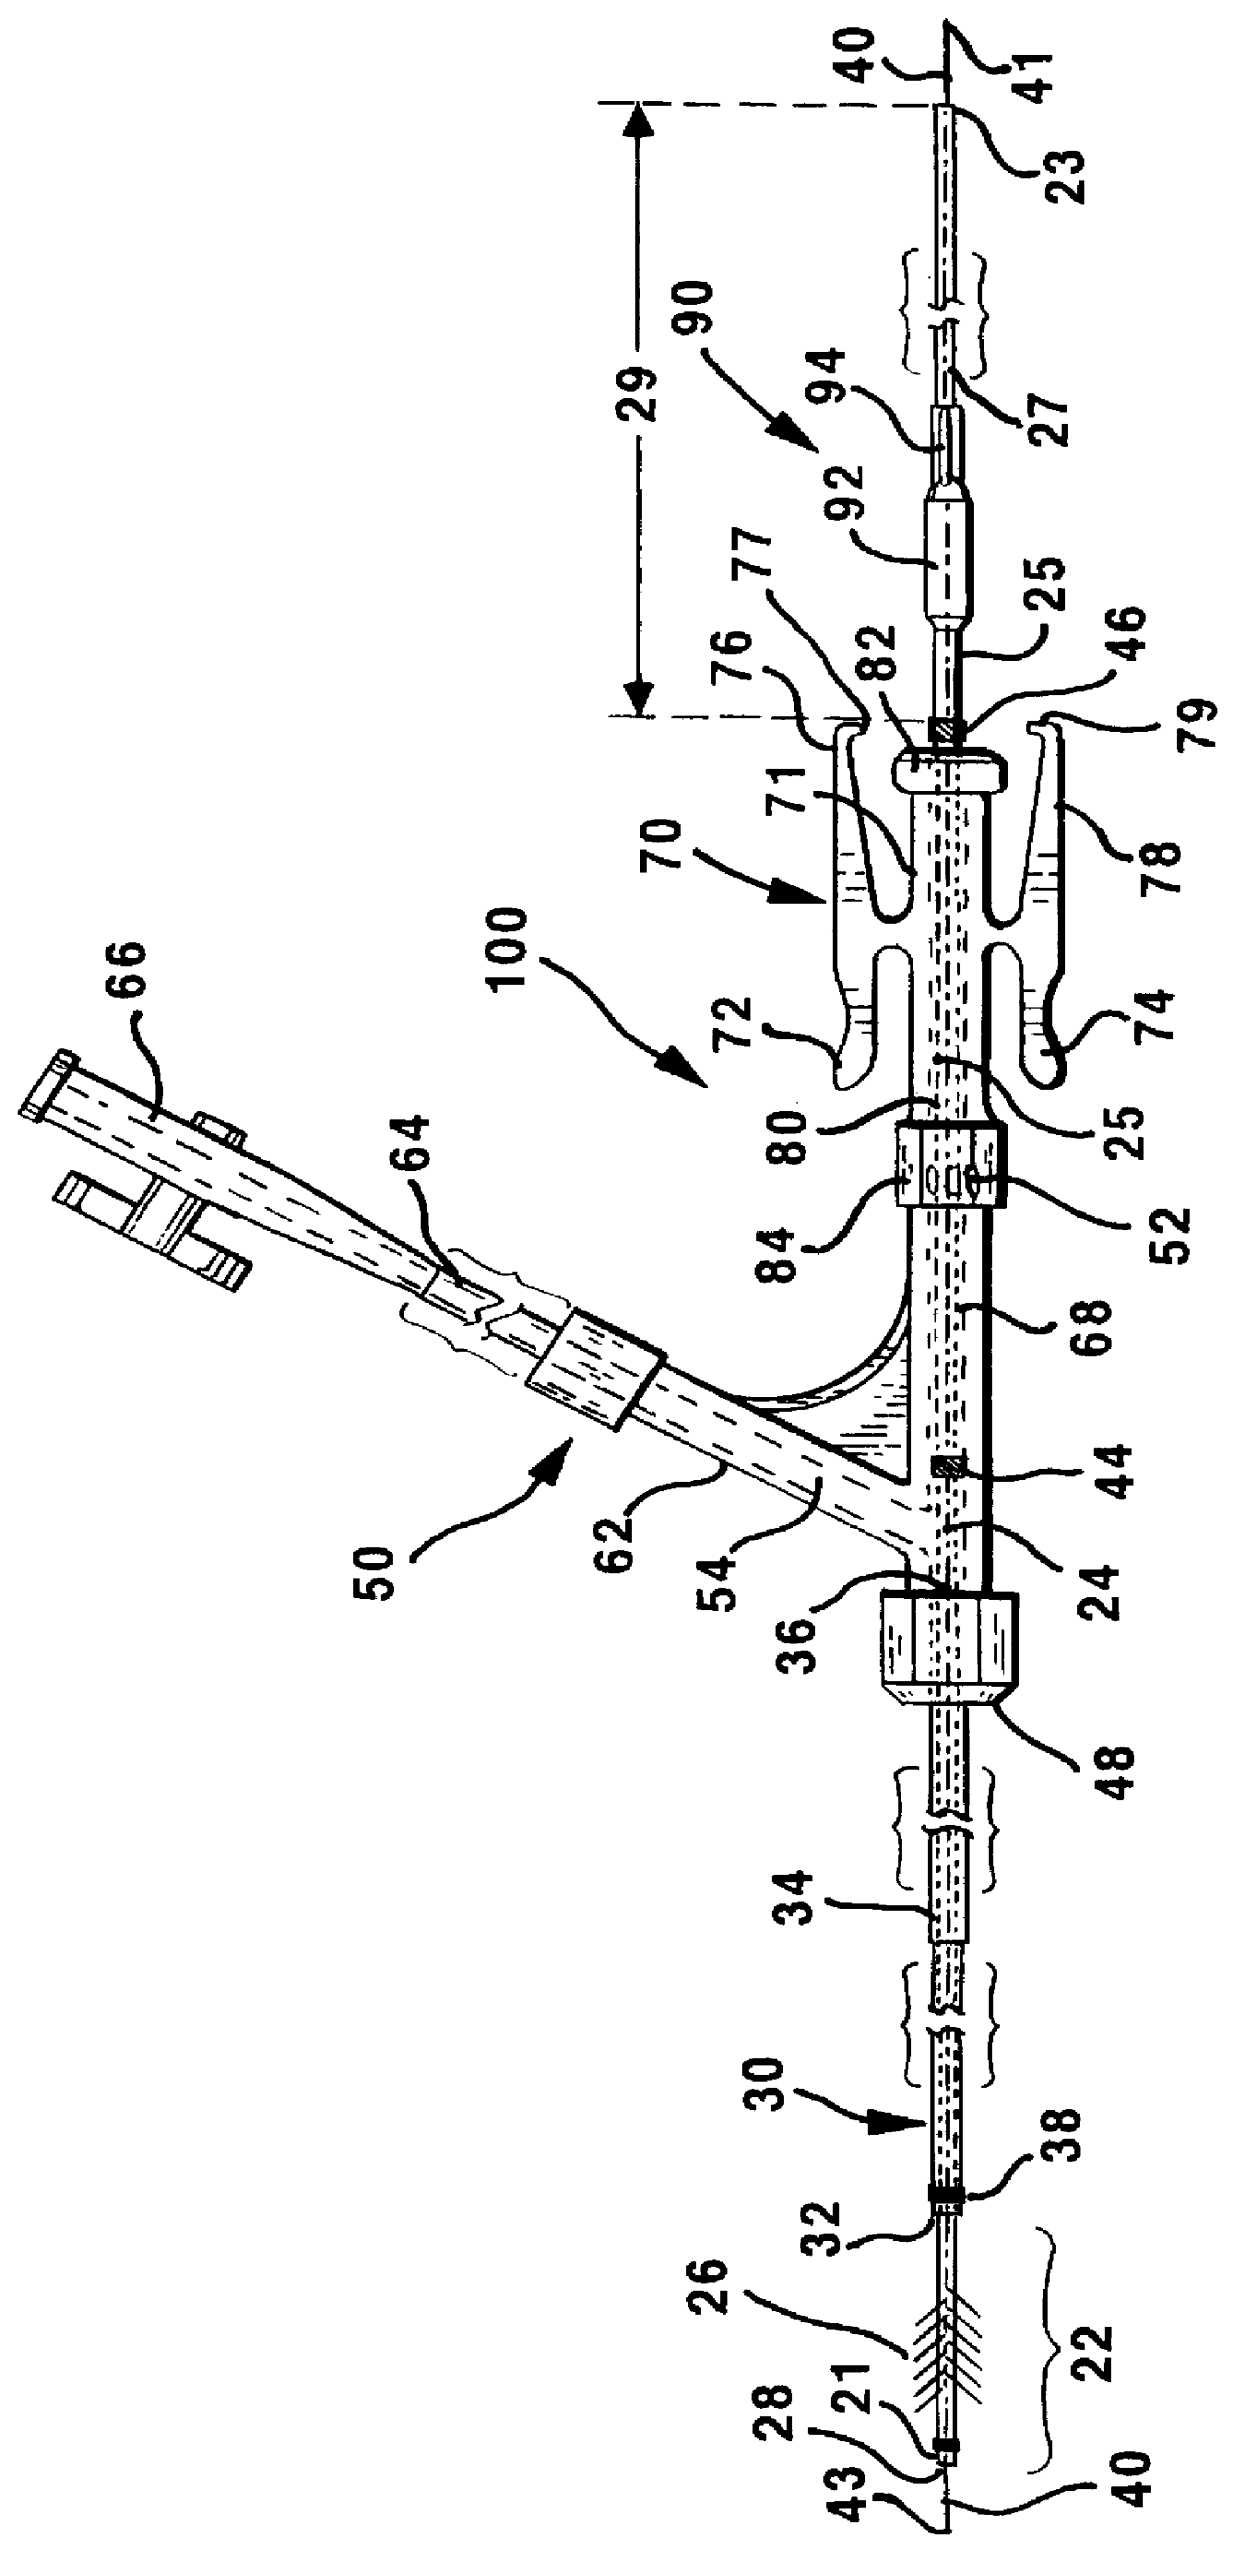 Rotatable attachment mechanism for attaching a medical obstruction treatment device sub-assembly to a drive motor unit